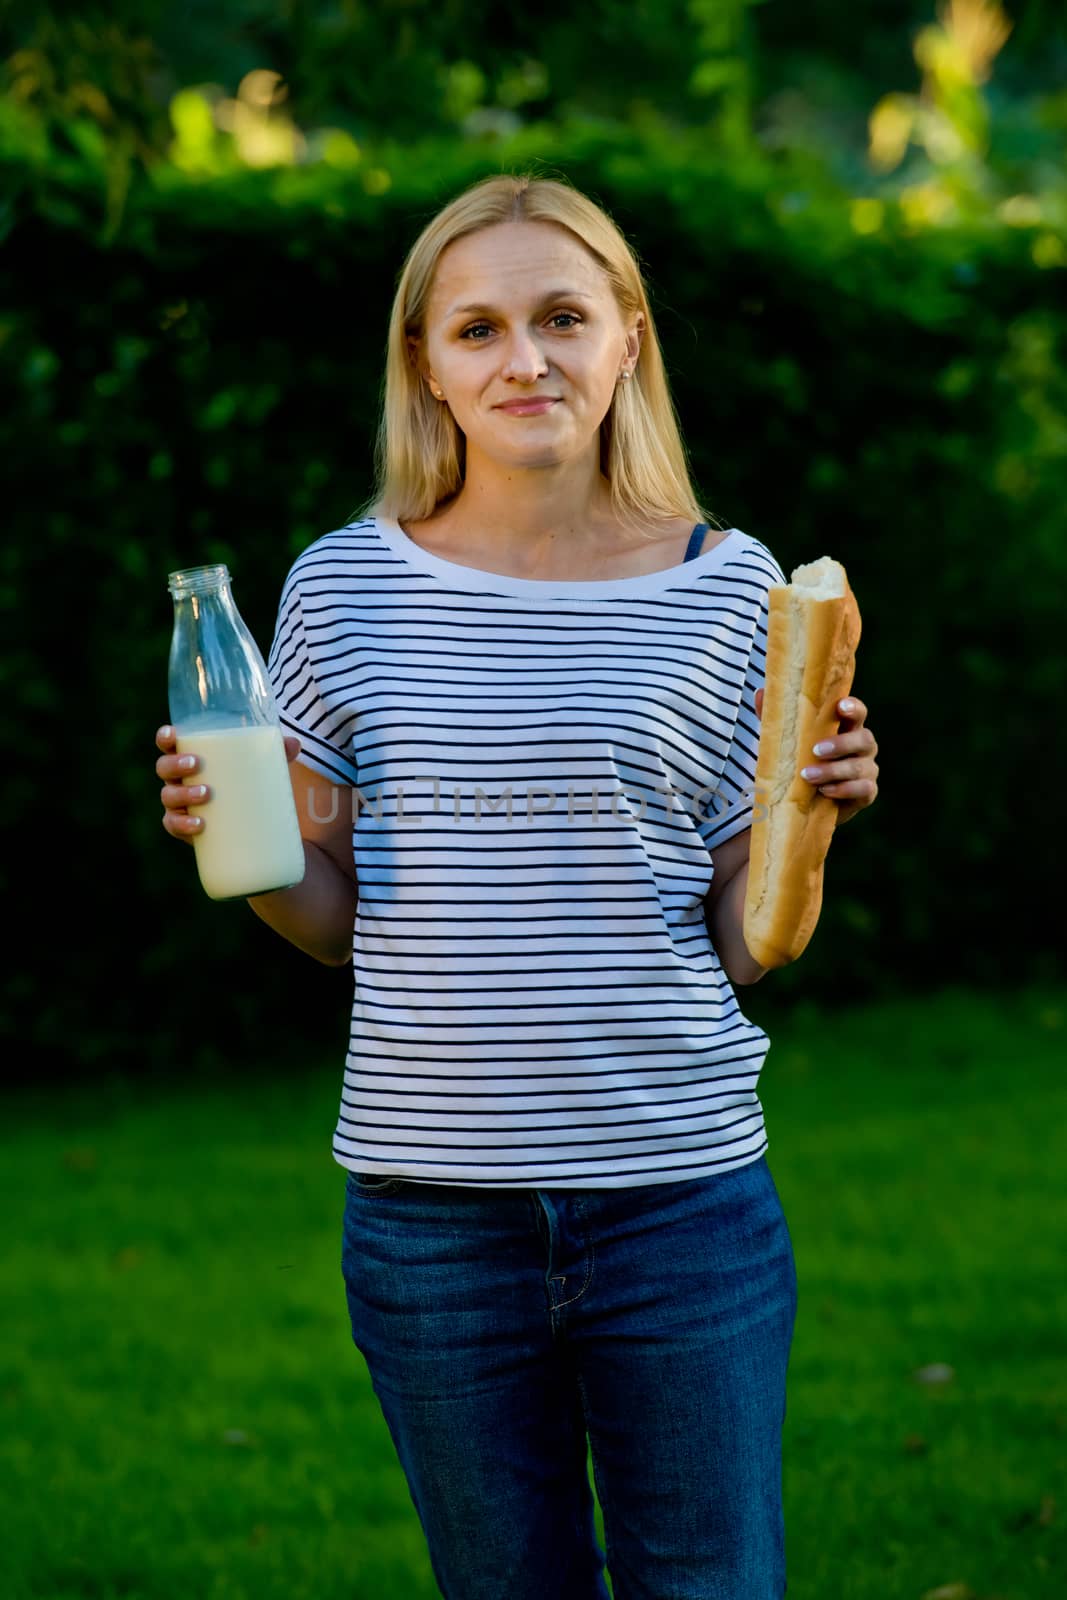 Portrait of a young woman who stands in her garden and holds a glass bottle with milk and a baguette.